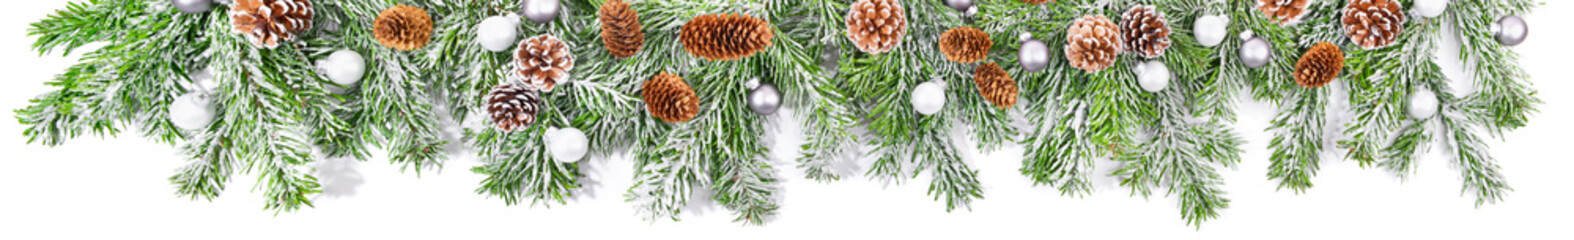 Christmas Fir Branches with Fir Cones and Snow isolated on white Background - Panorama